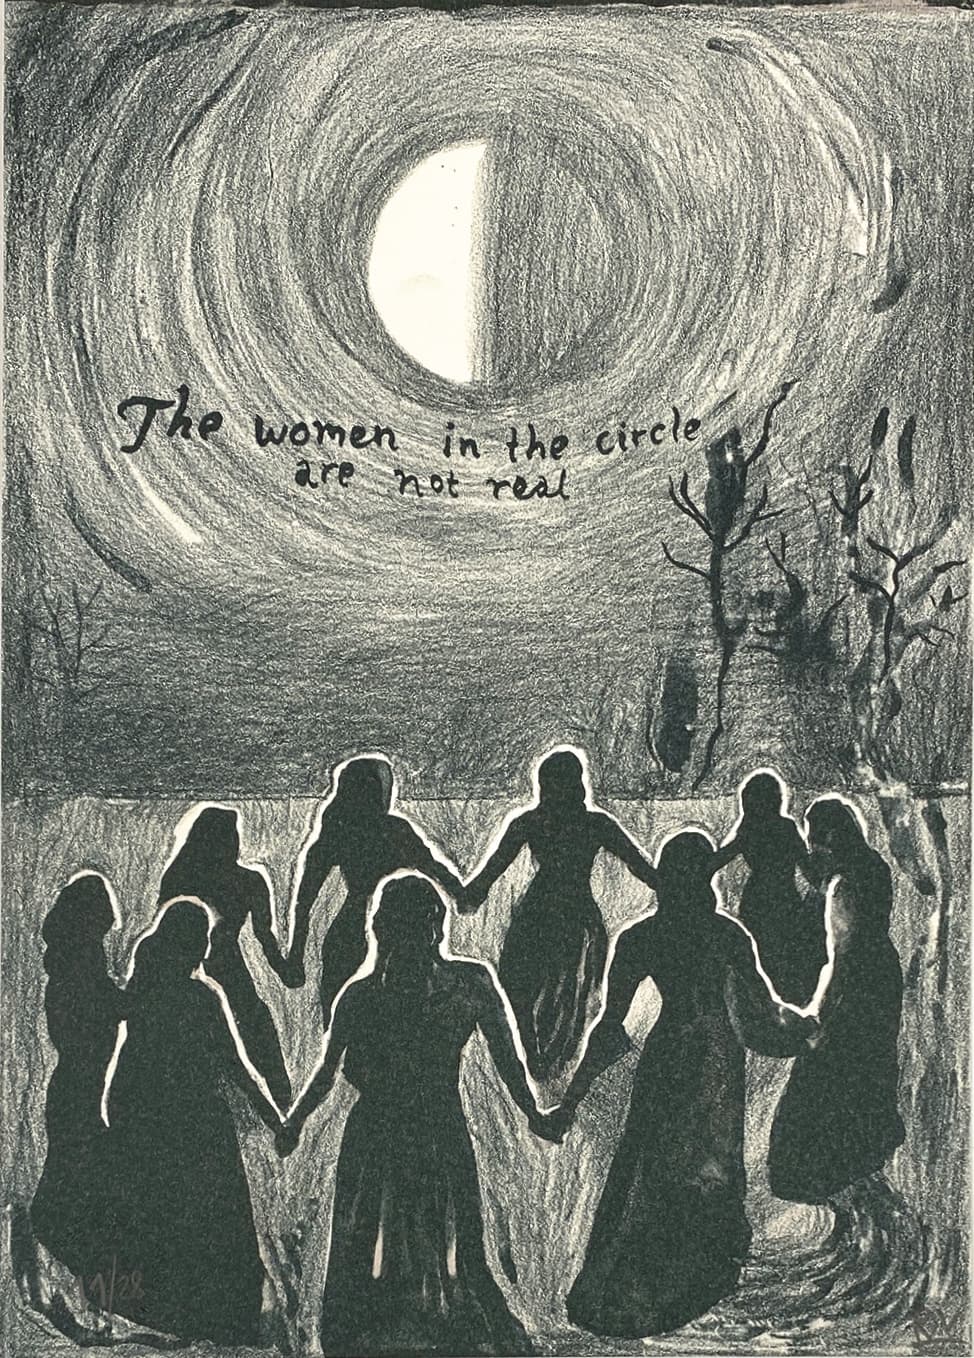 Rikke Villadsen - "The women in the circle are not real"